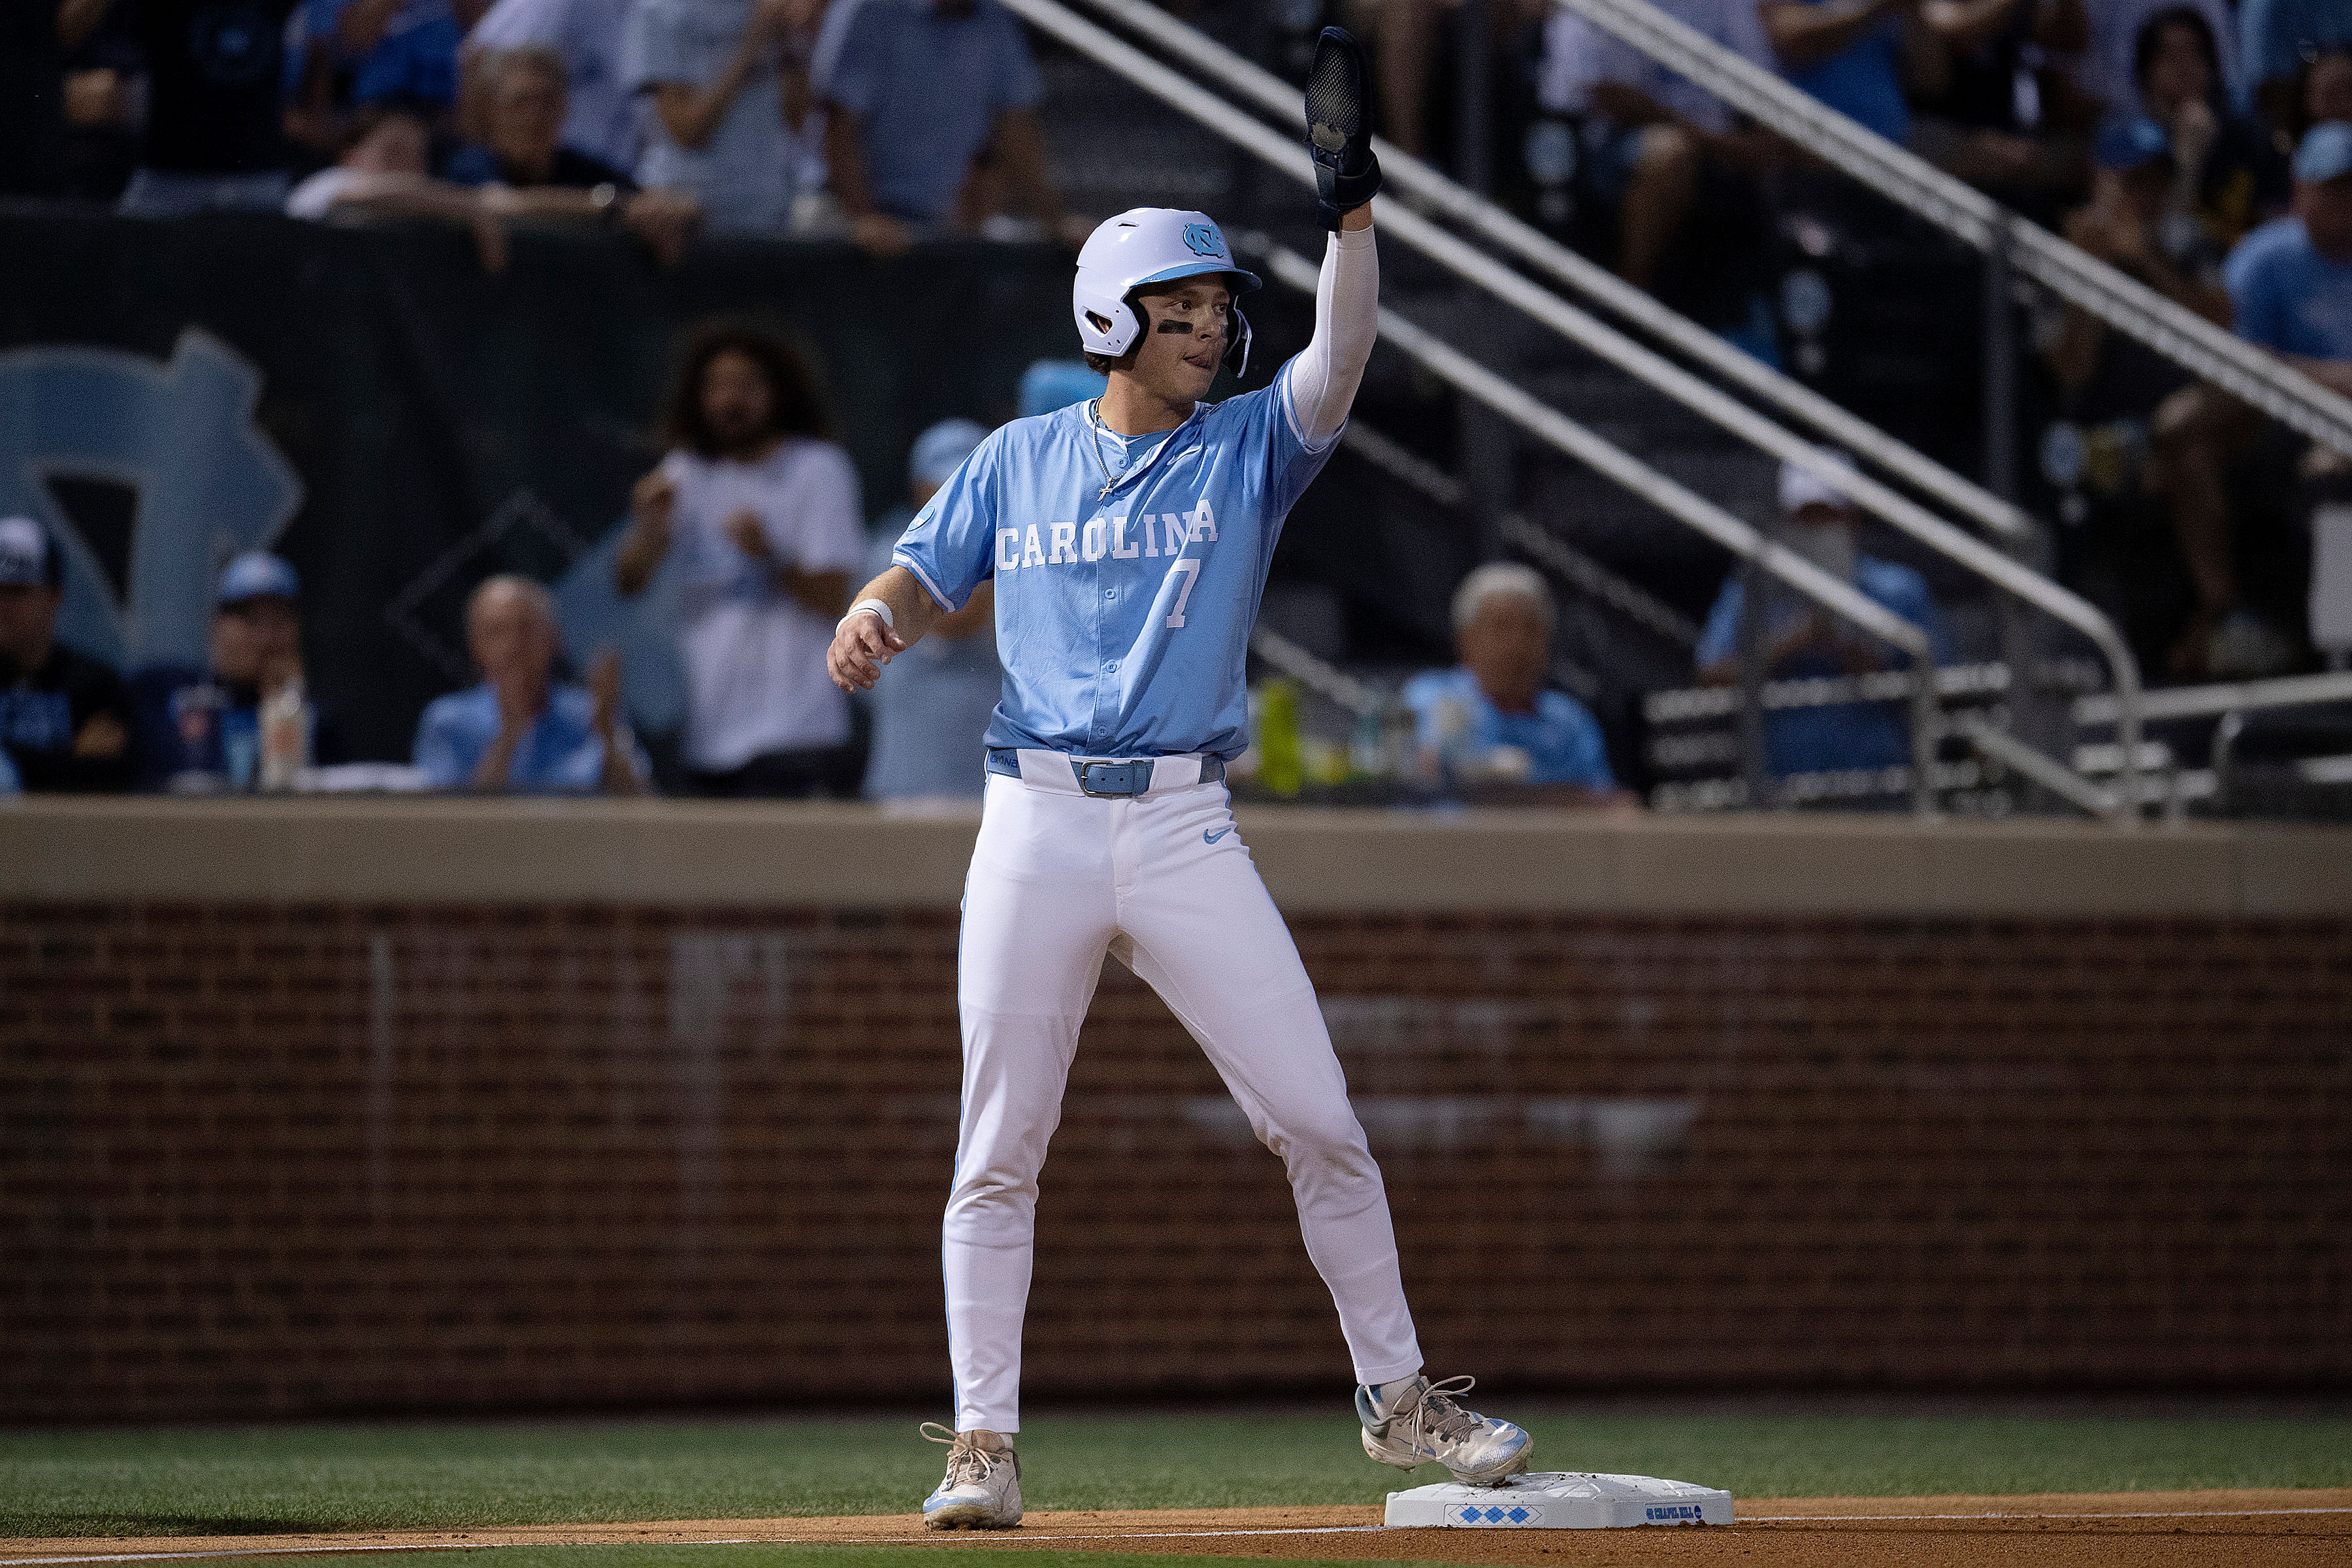 North Carolina and Vance Honeycutt will face Virginia to open College World Series play.